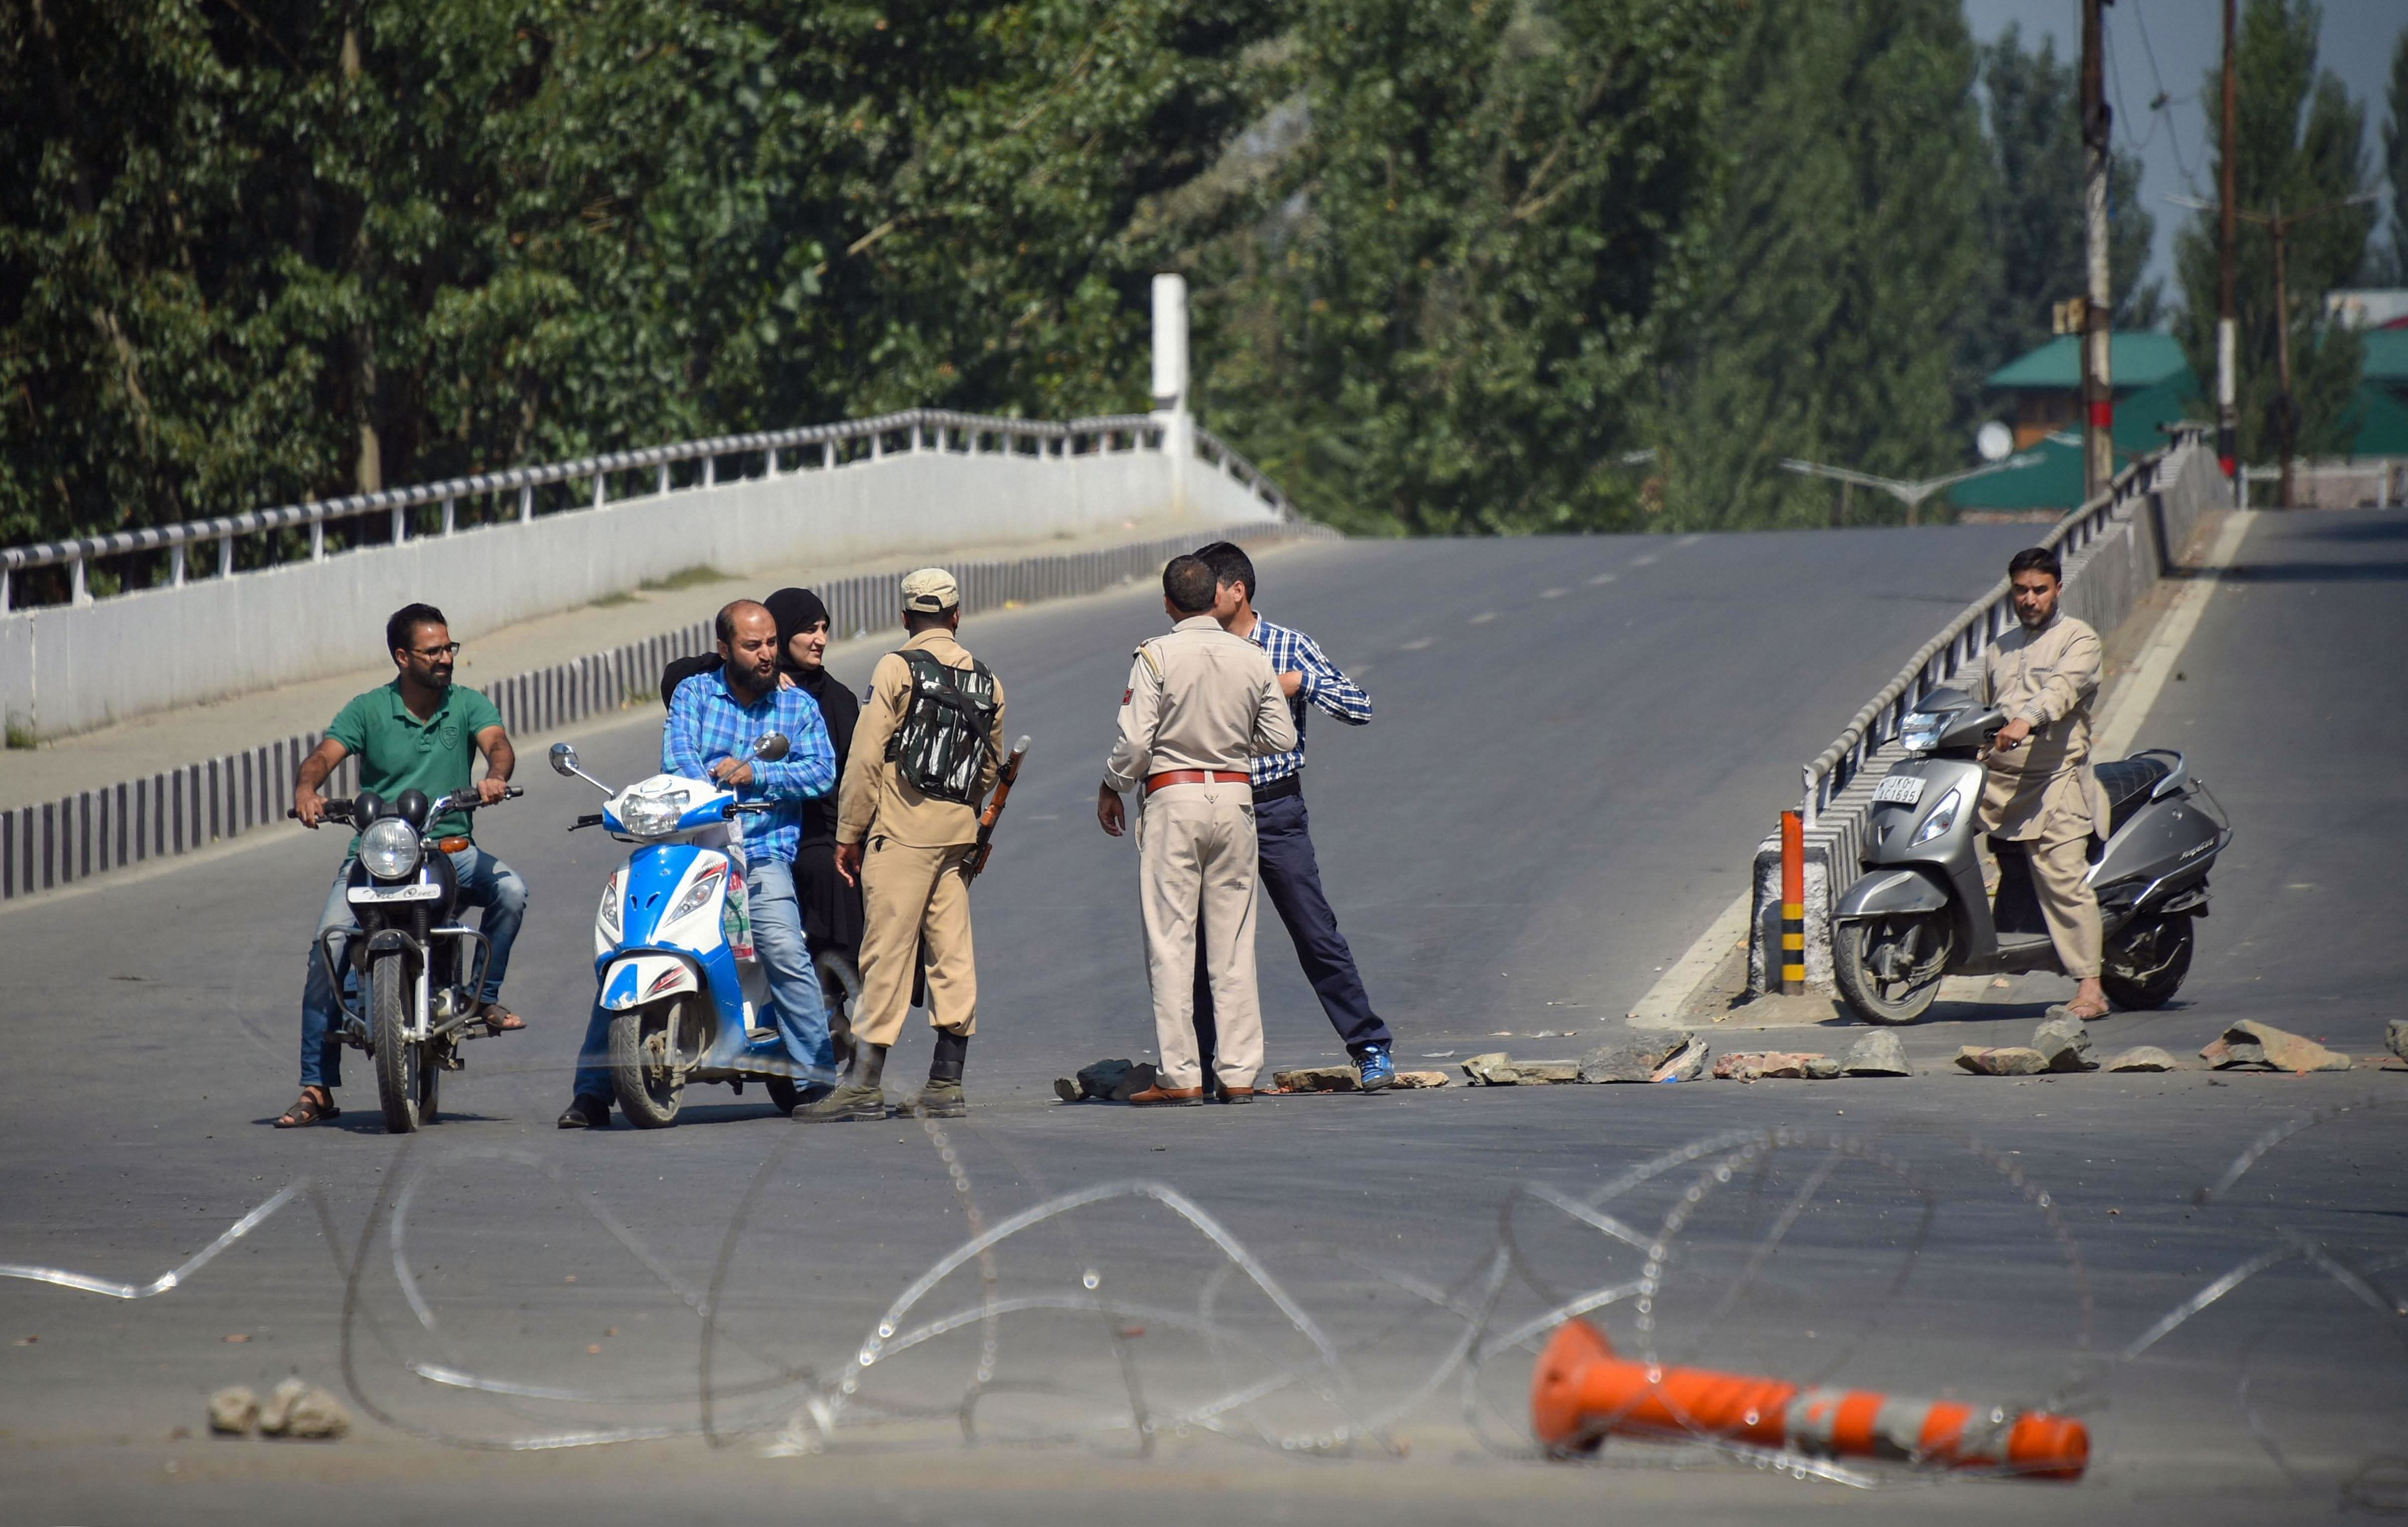 Srinagar: Security personnel stop two wheelers for checking during curfew like restrictions in Srinagar. (PTI Photo)